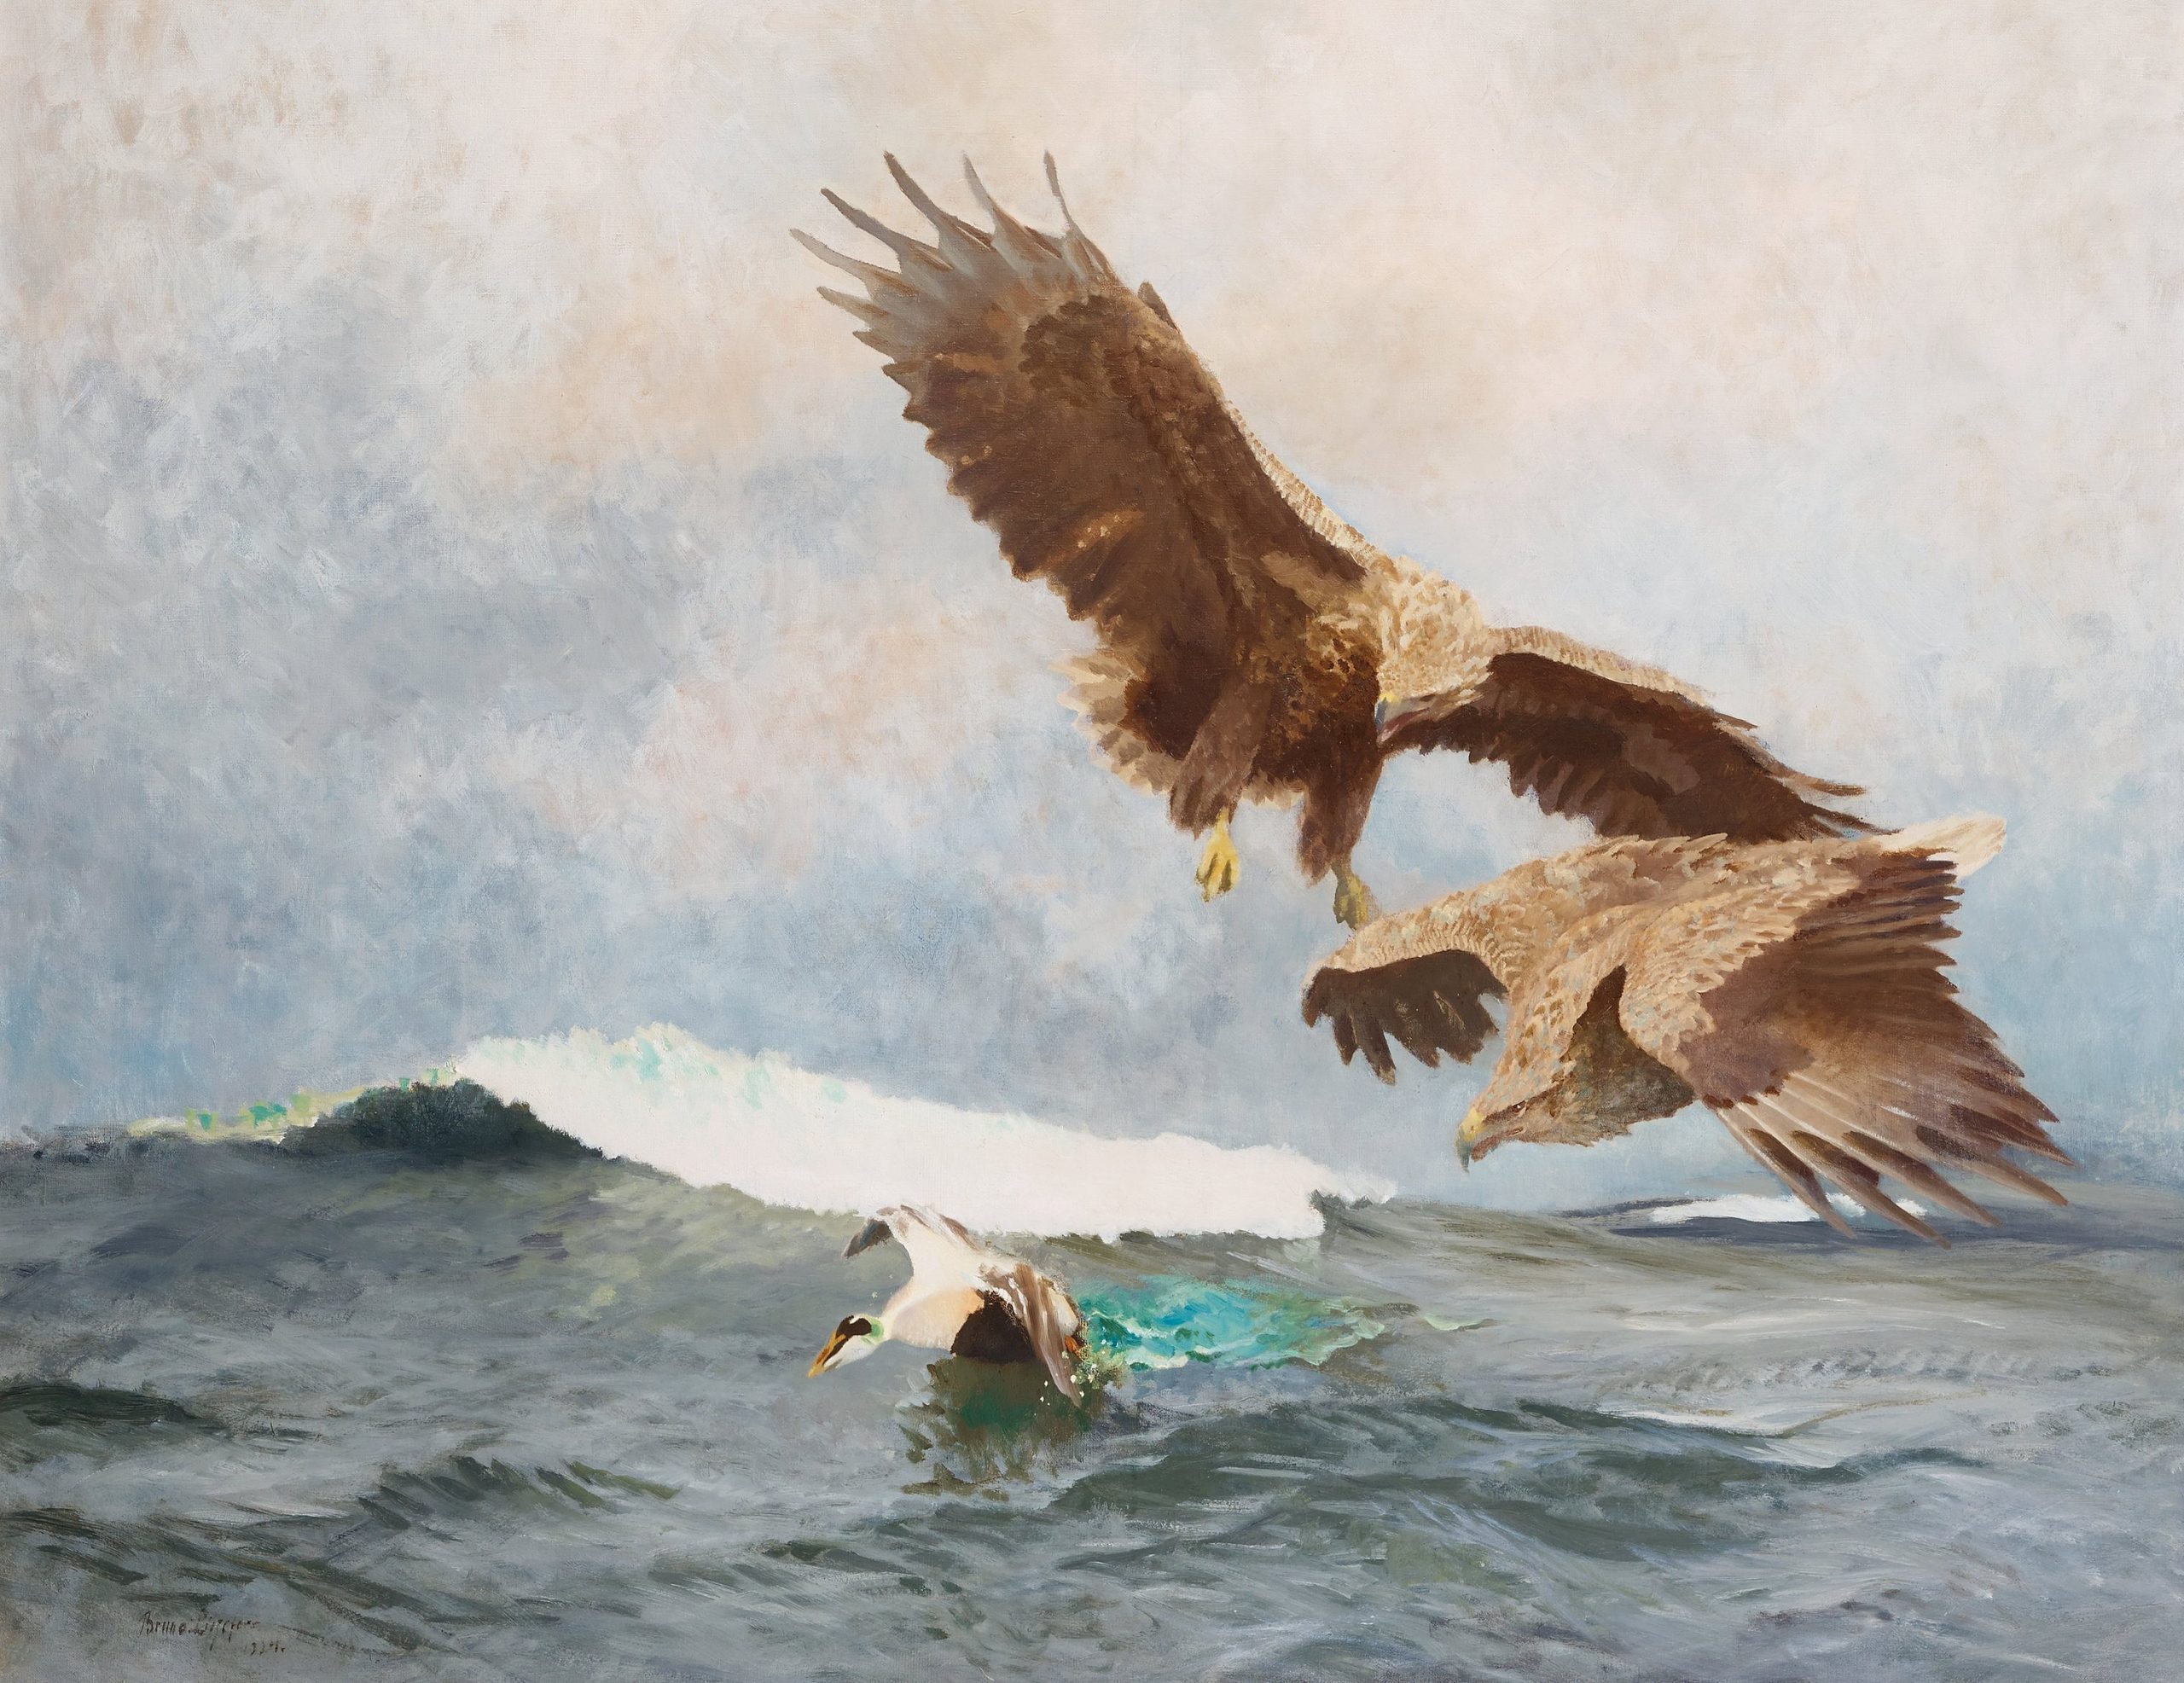 A pair of eagles hunting a bird in the ocean